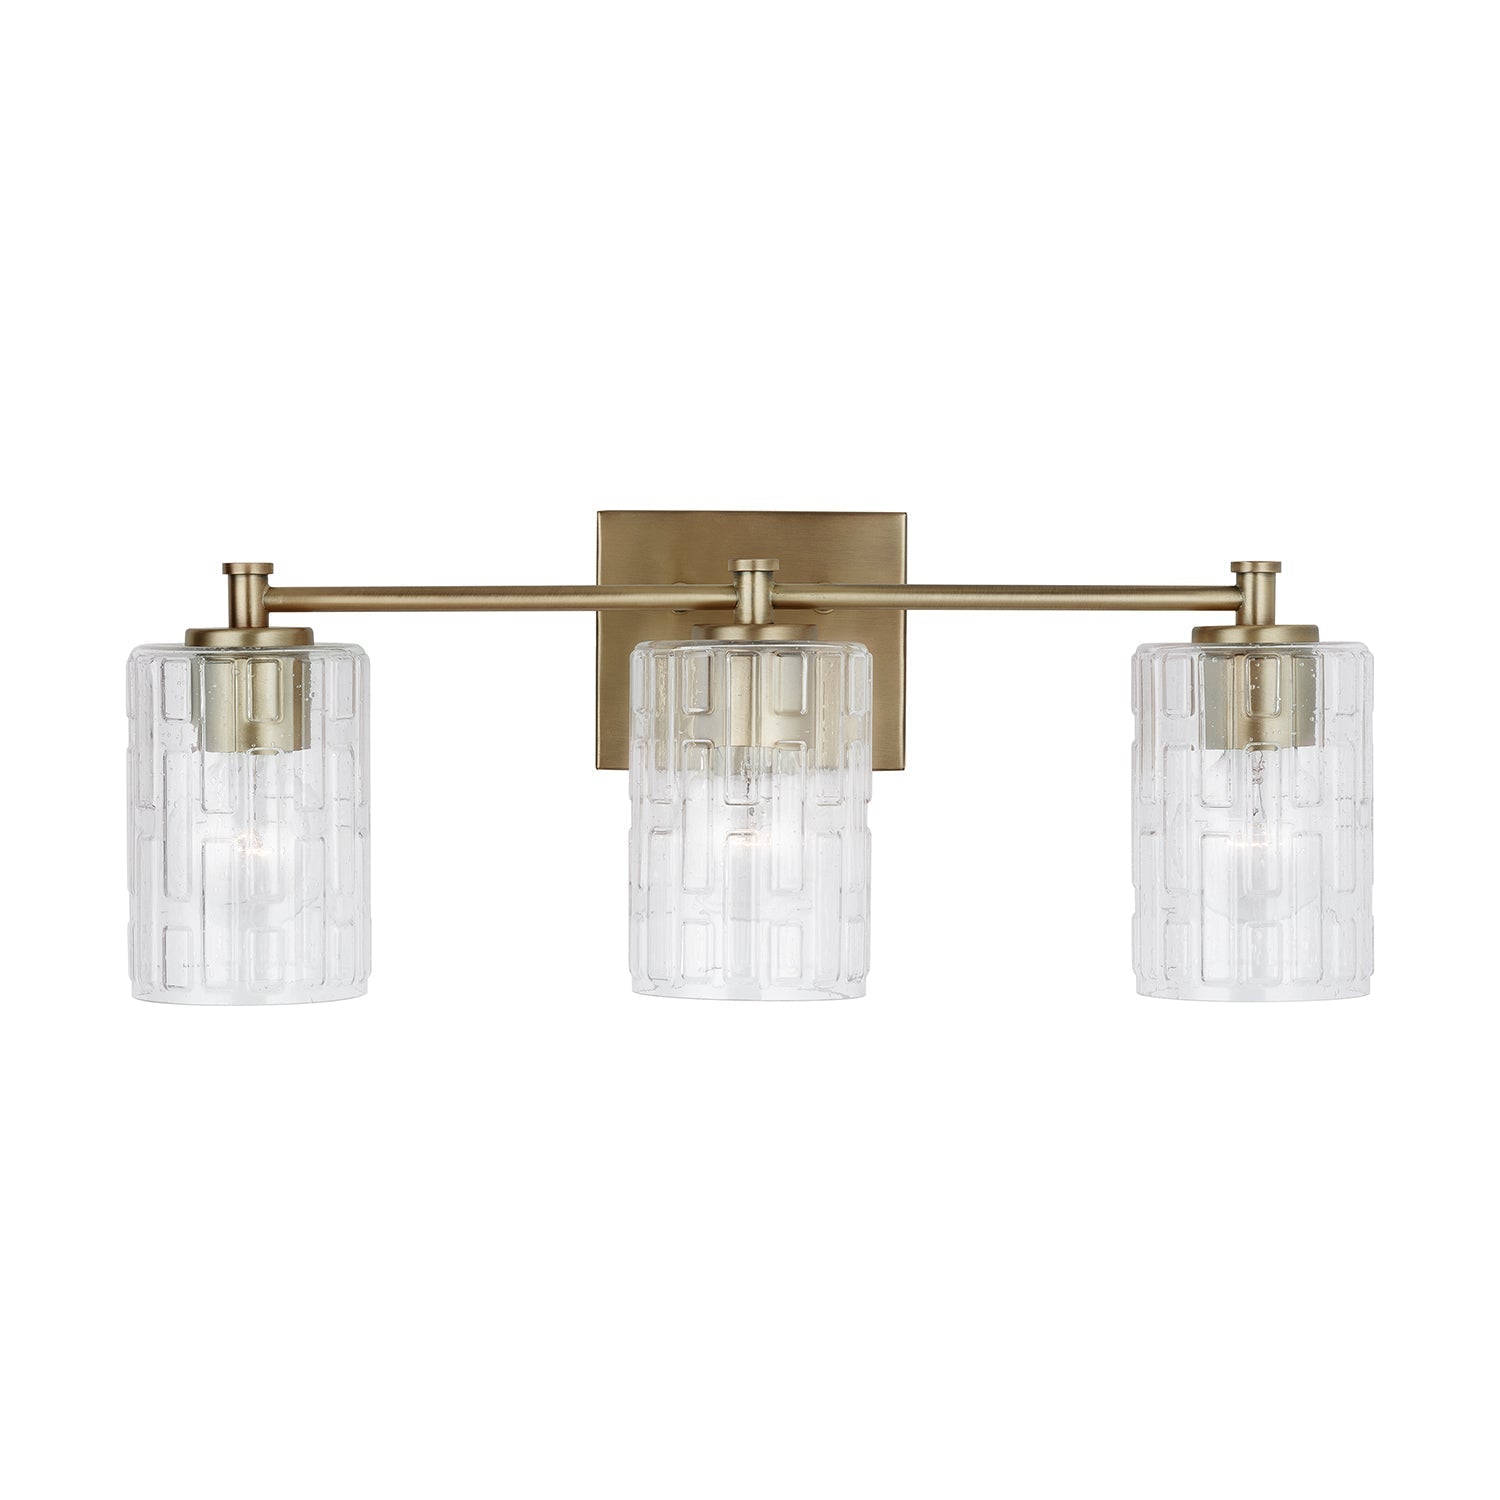 Capital Emerson 138331AD-491 Bath Vanity Light 23 in. wide - Aged Brass